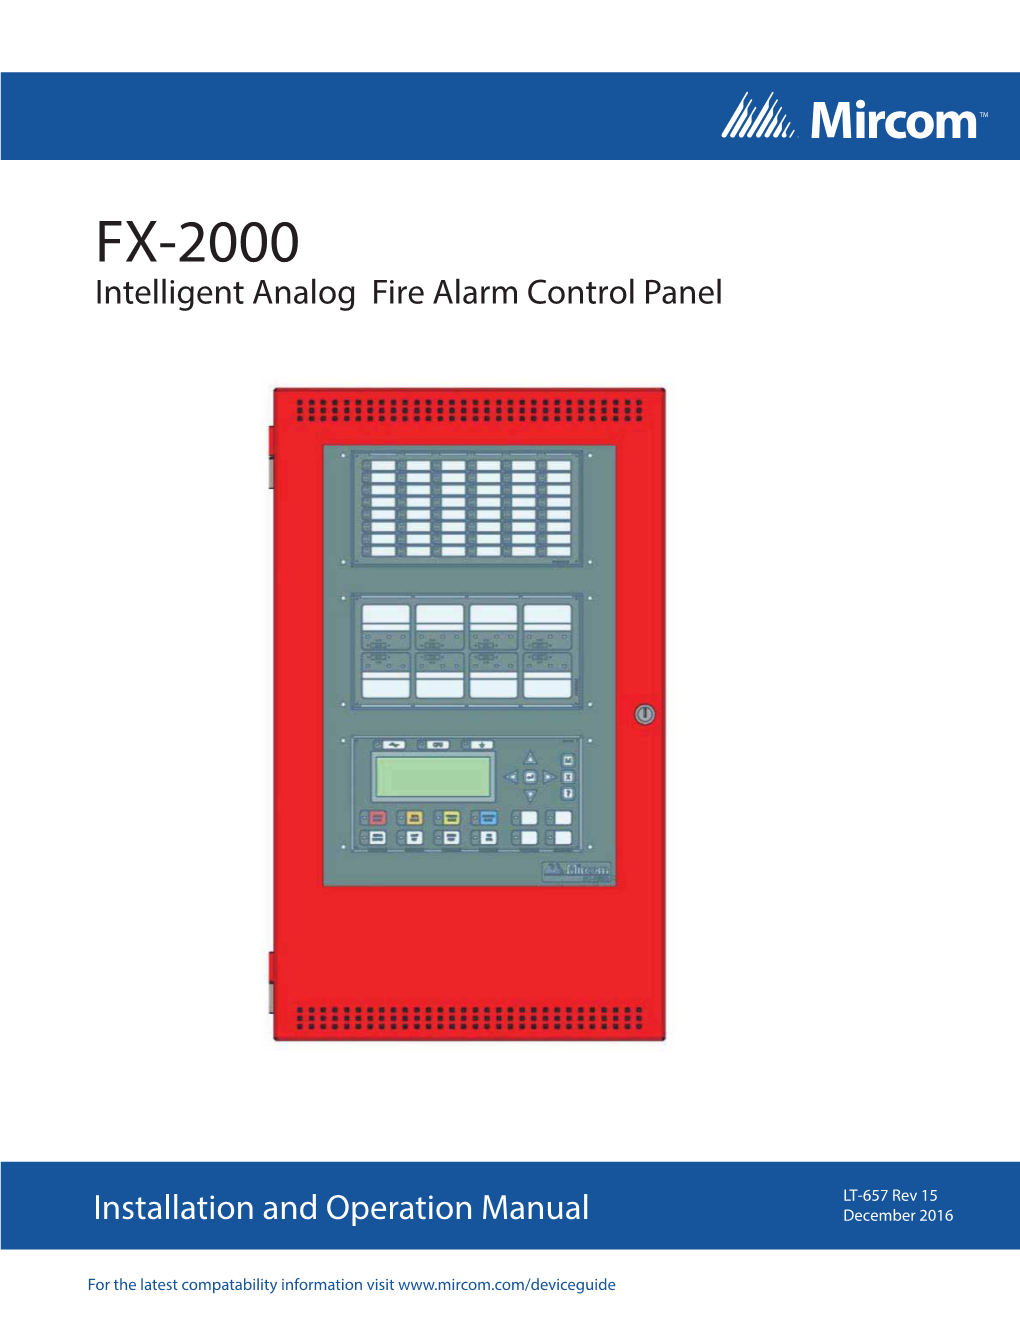 FX-2000 Installation and Operation Manual